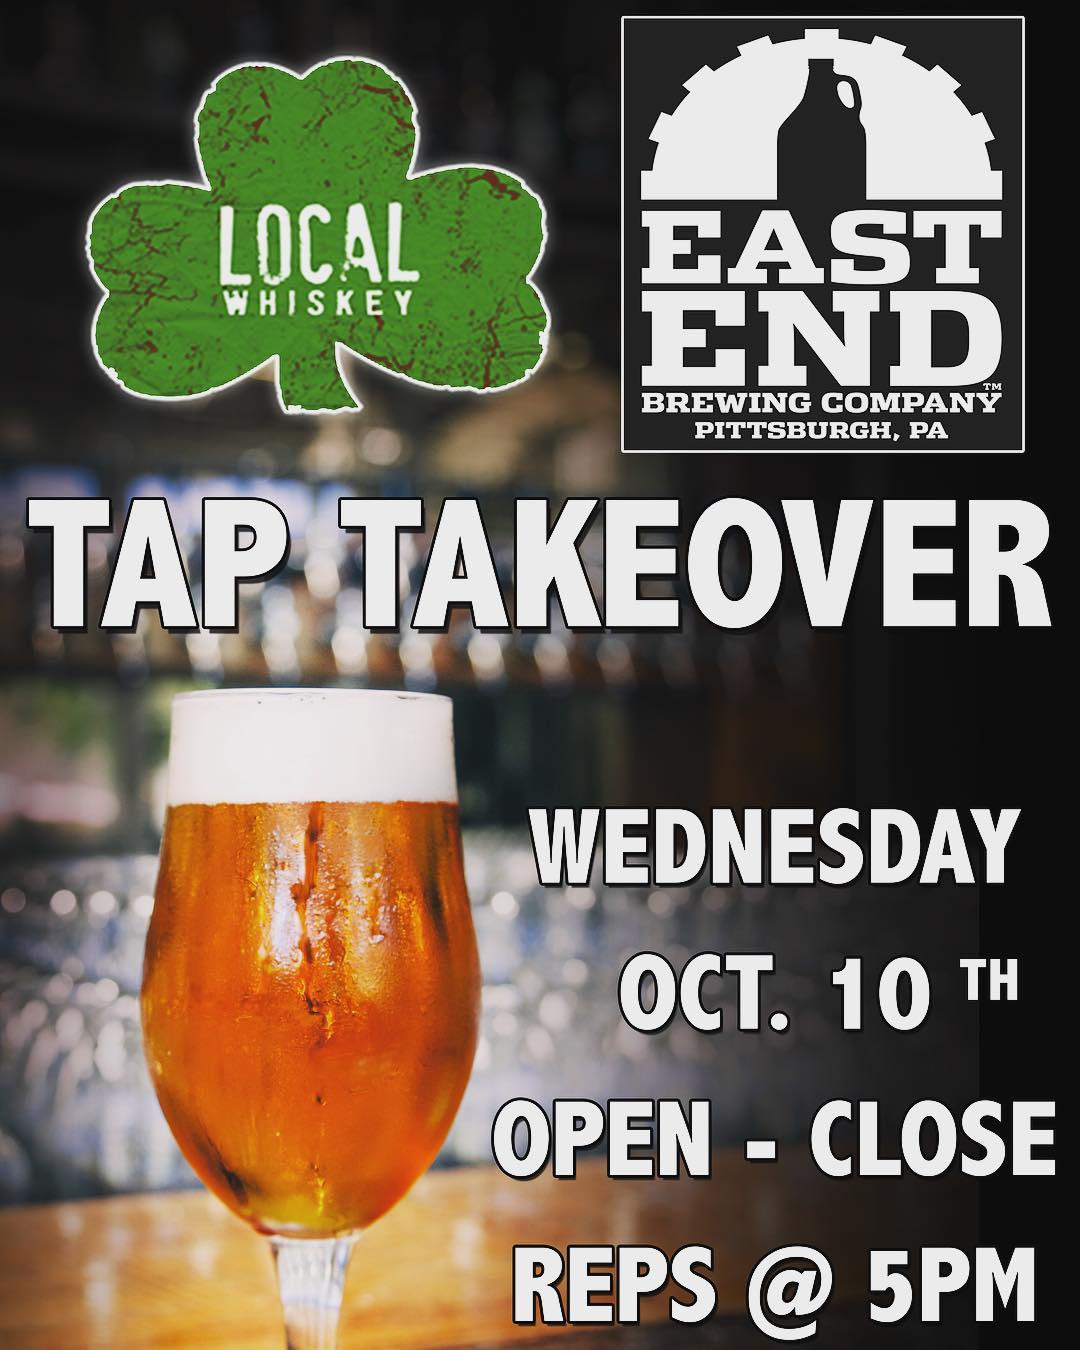 Join us this Wednesday, October 10th, at 5 pm as we host Pittsburgh’s own @eastendbrewing for a Tap Takeover!! ••• We will be tapping: *Bourbon Barrel Aged Fatter Gary *2017 Gratitude Barleywine *Bourbon Barrel Aged Nunkin *Britsburgh Honey Heather *Guabb